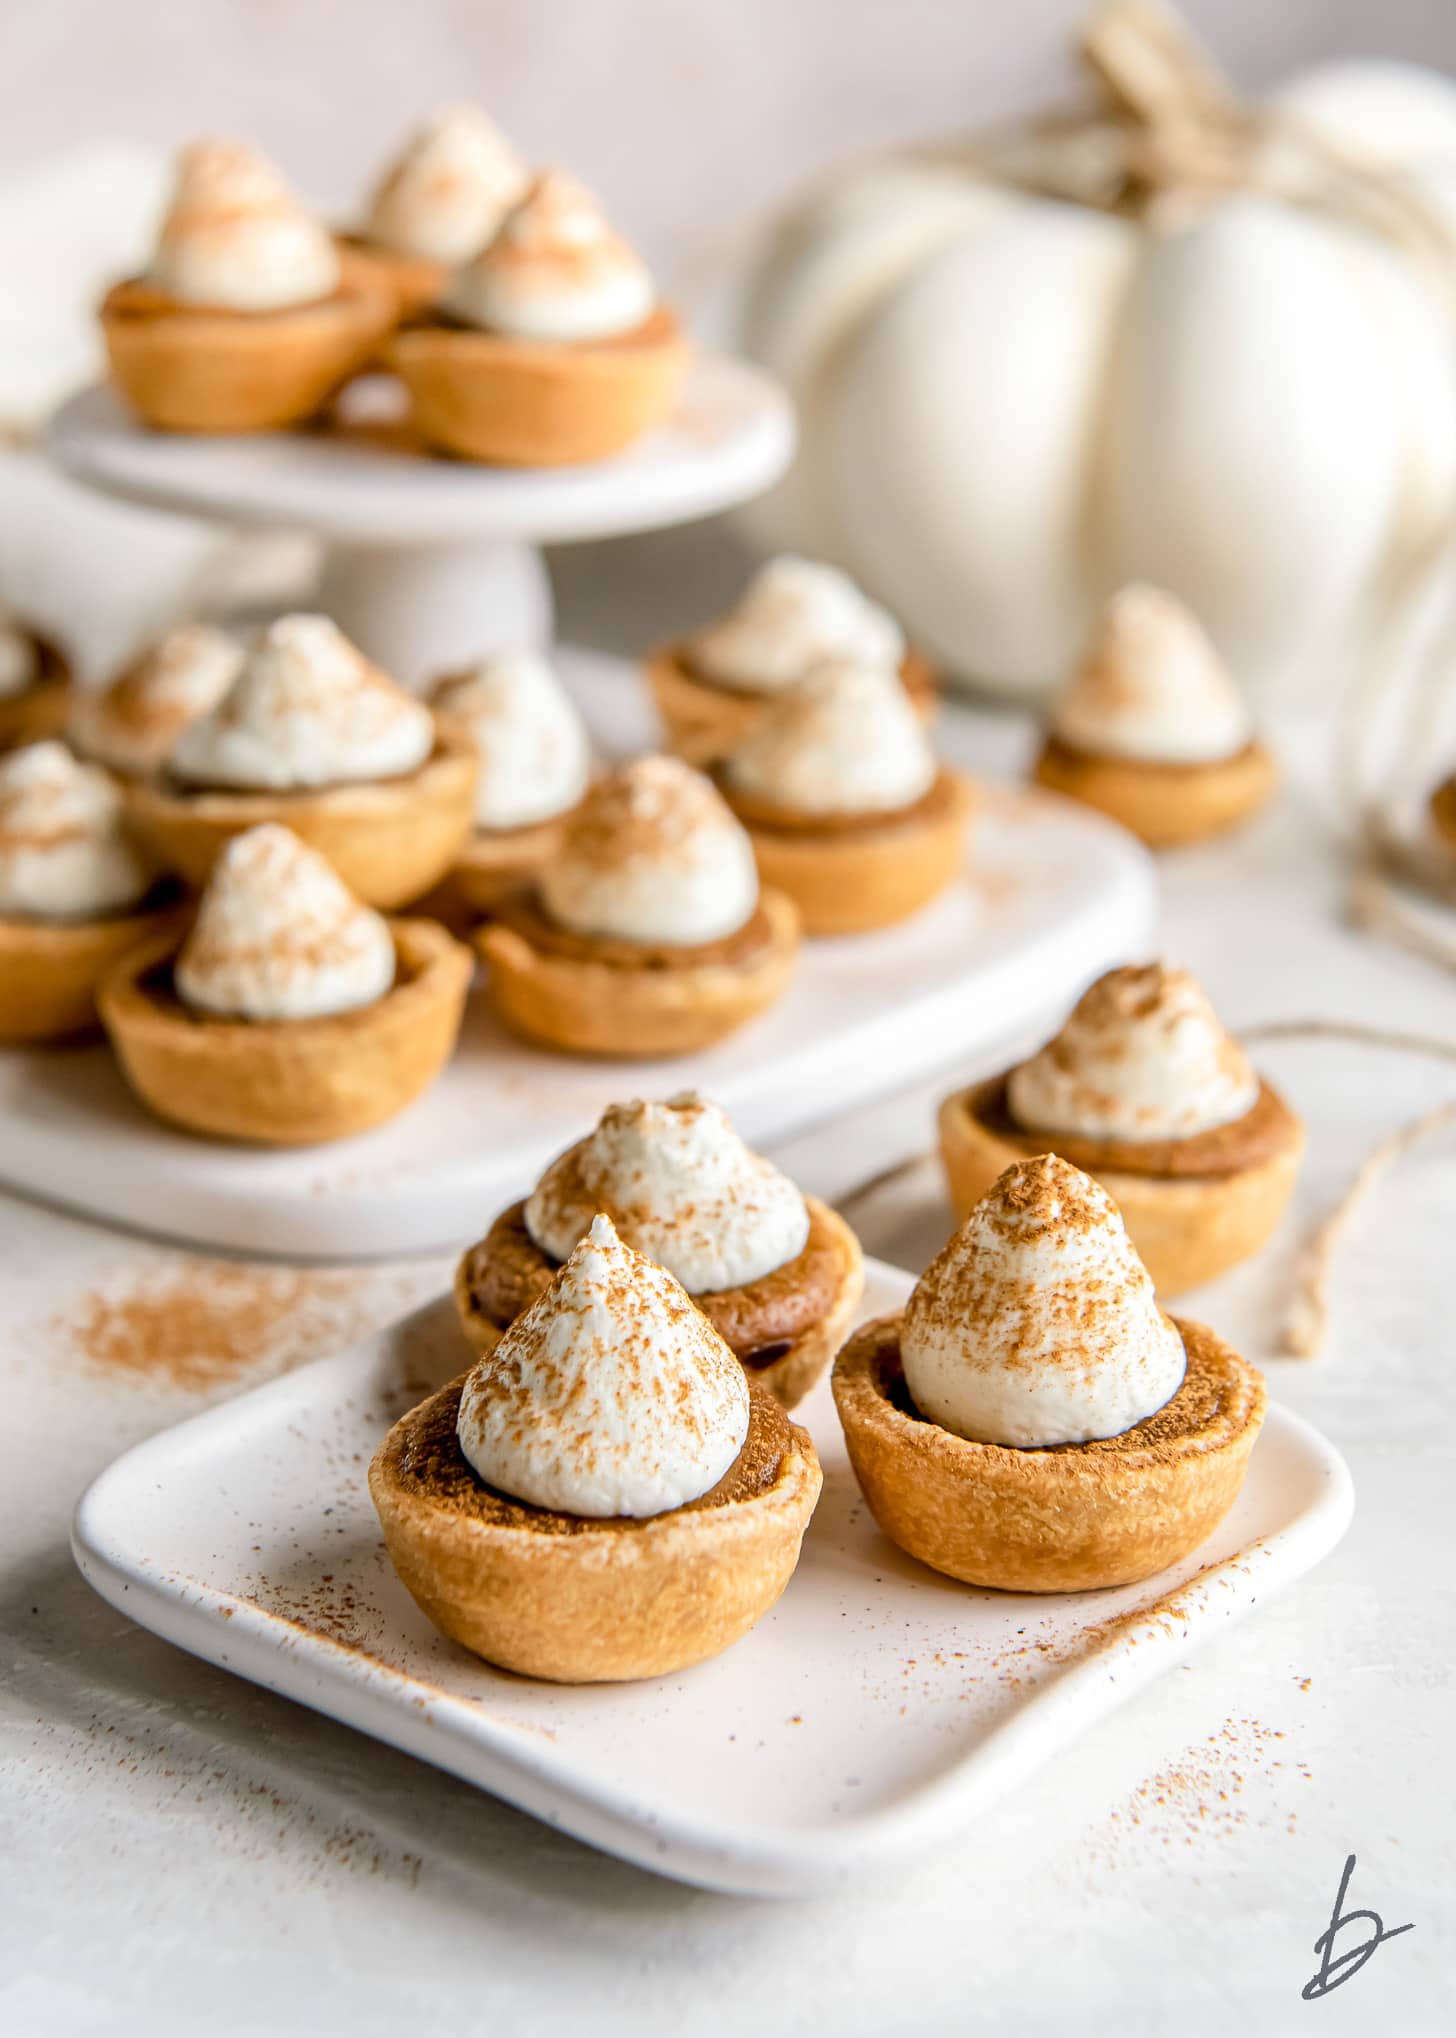 bite-sized pumpkin pies with dollops of whipped cream on plate in front of more pies on platter.